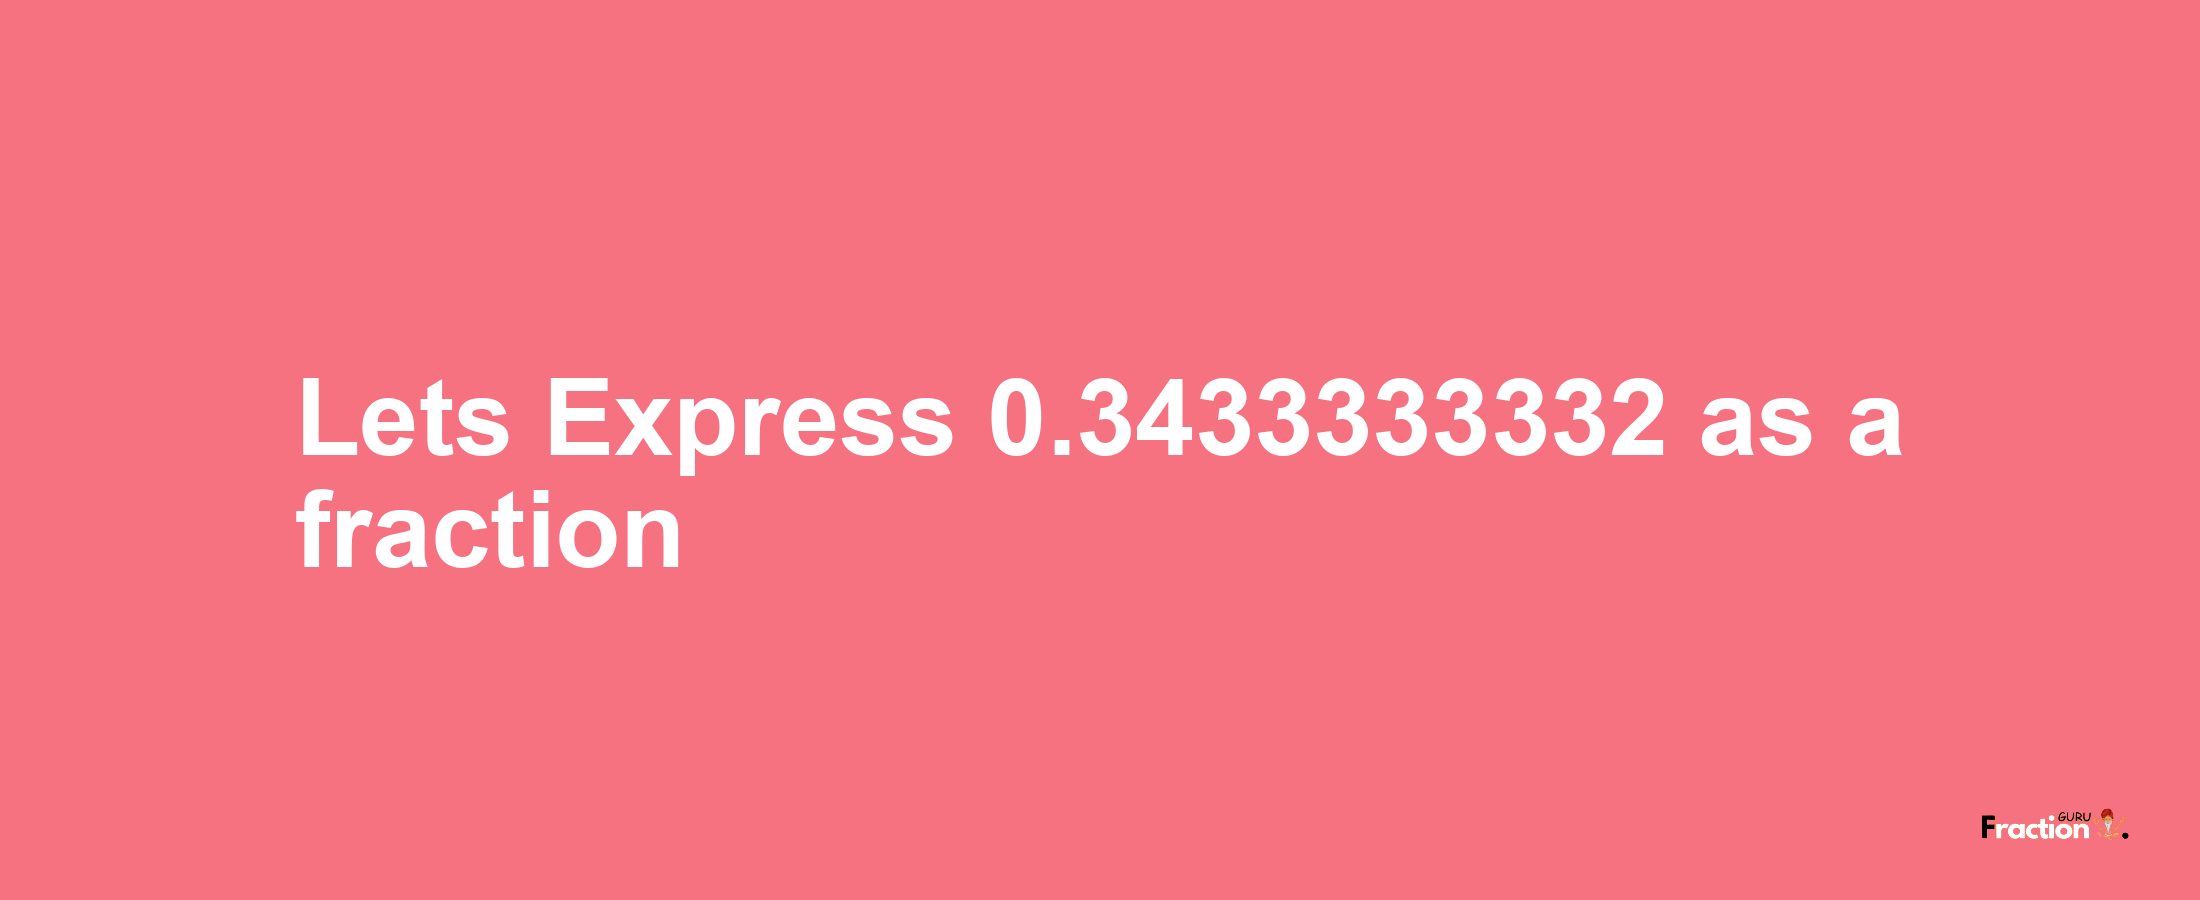 Lets Express 0.3433333332 as afraction